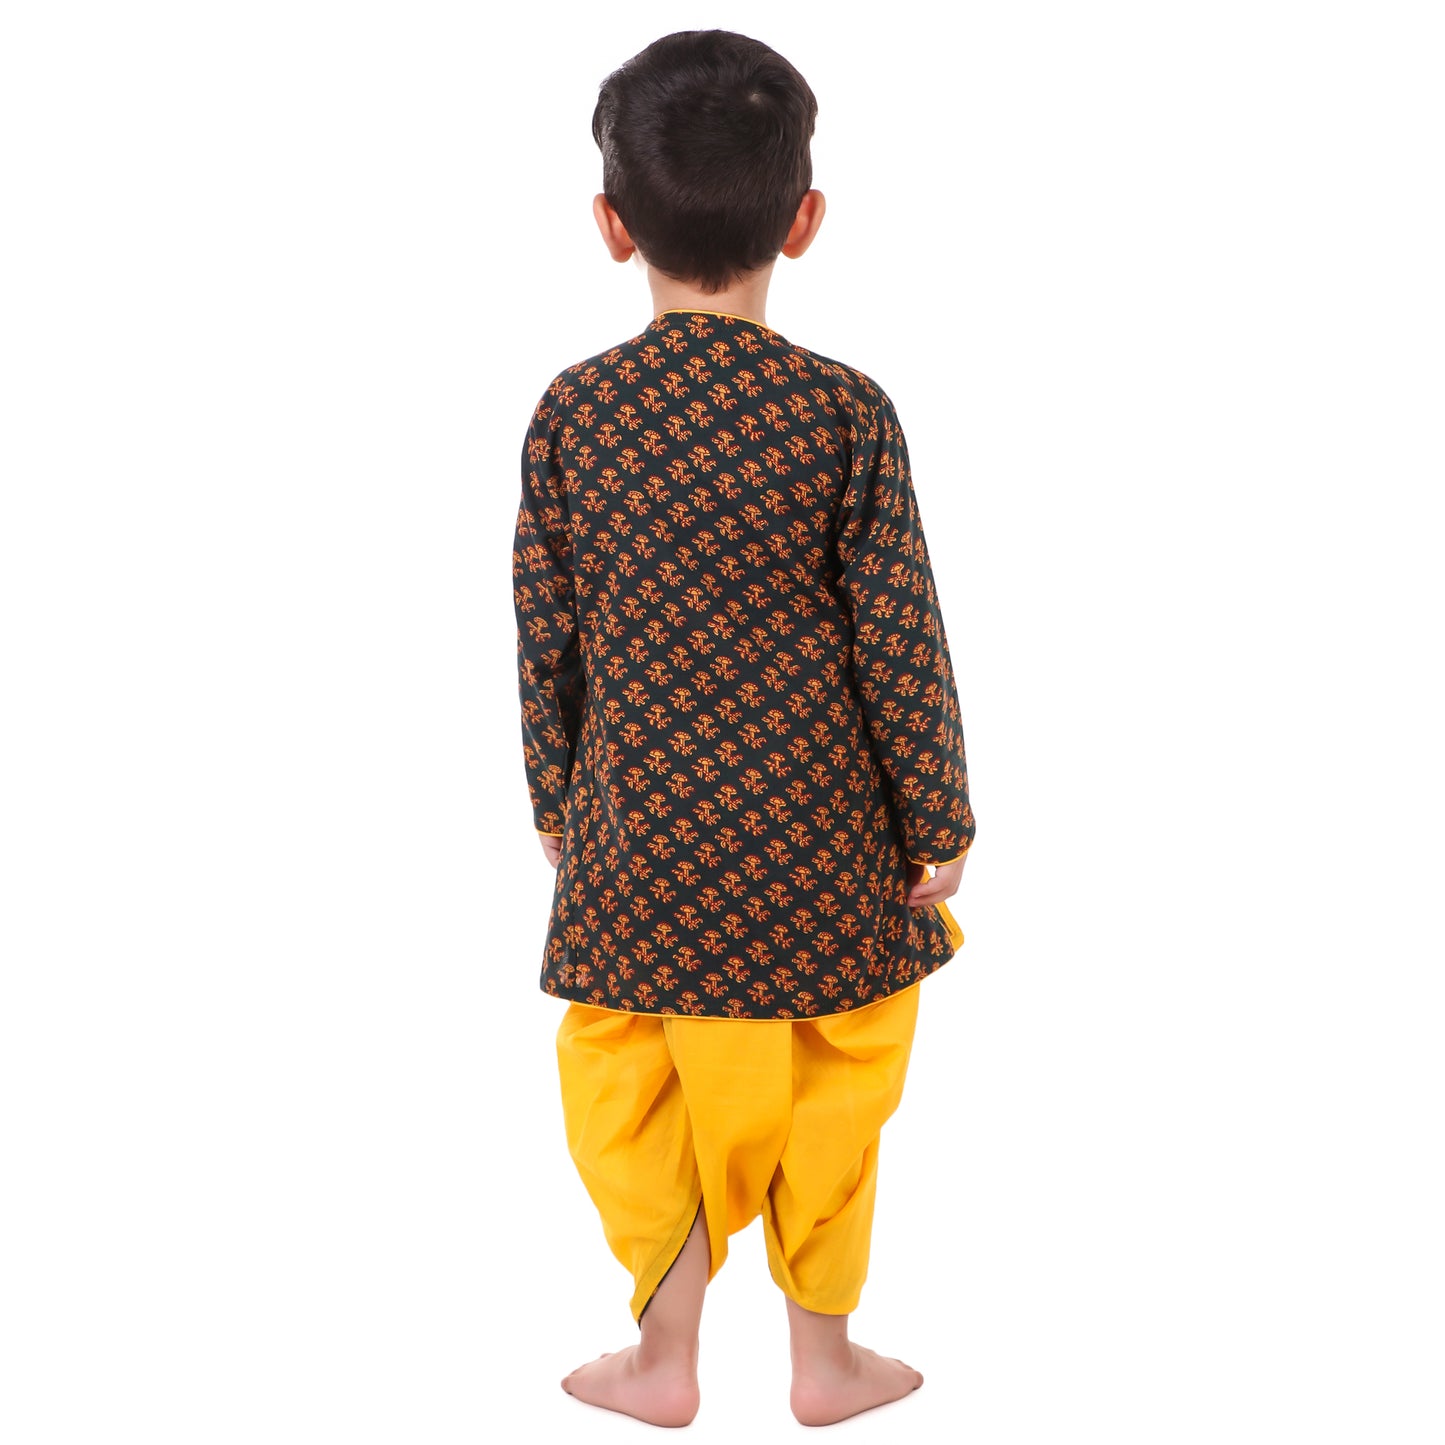 Green Dhoti Kurta for Boys, Ages 3 Months-16 Years, Cotton, Angrakha Style, Block Print